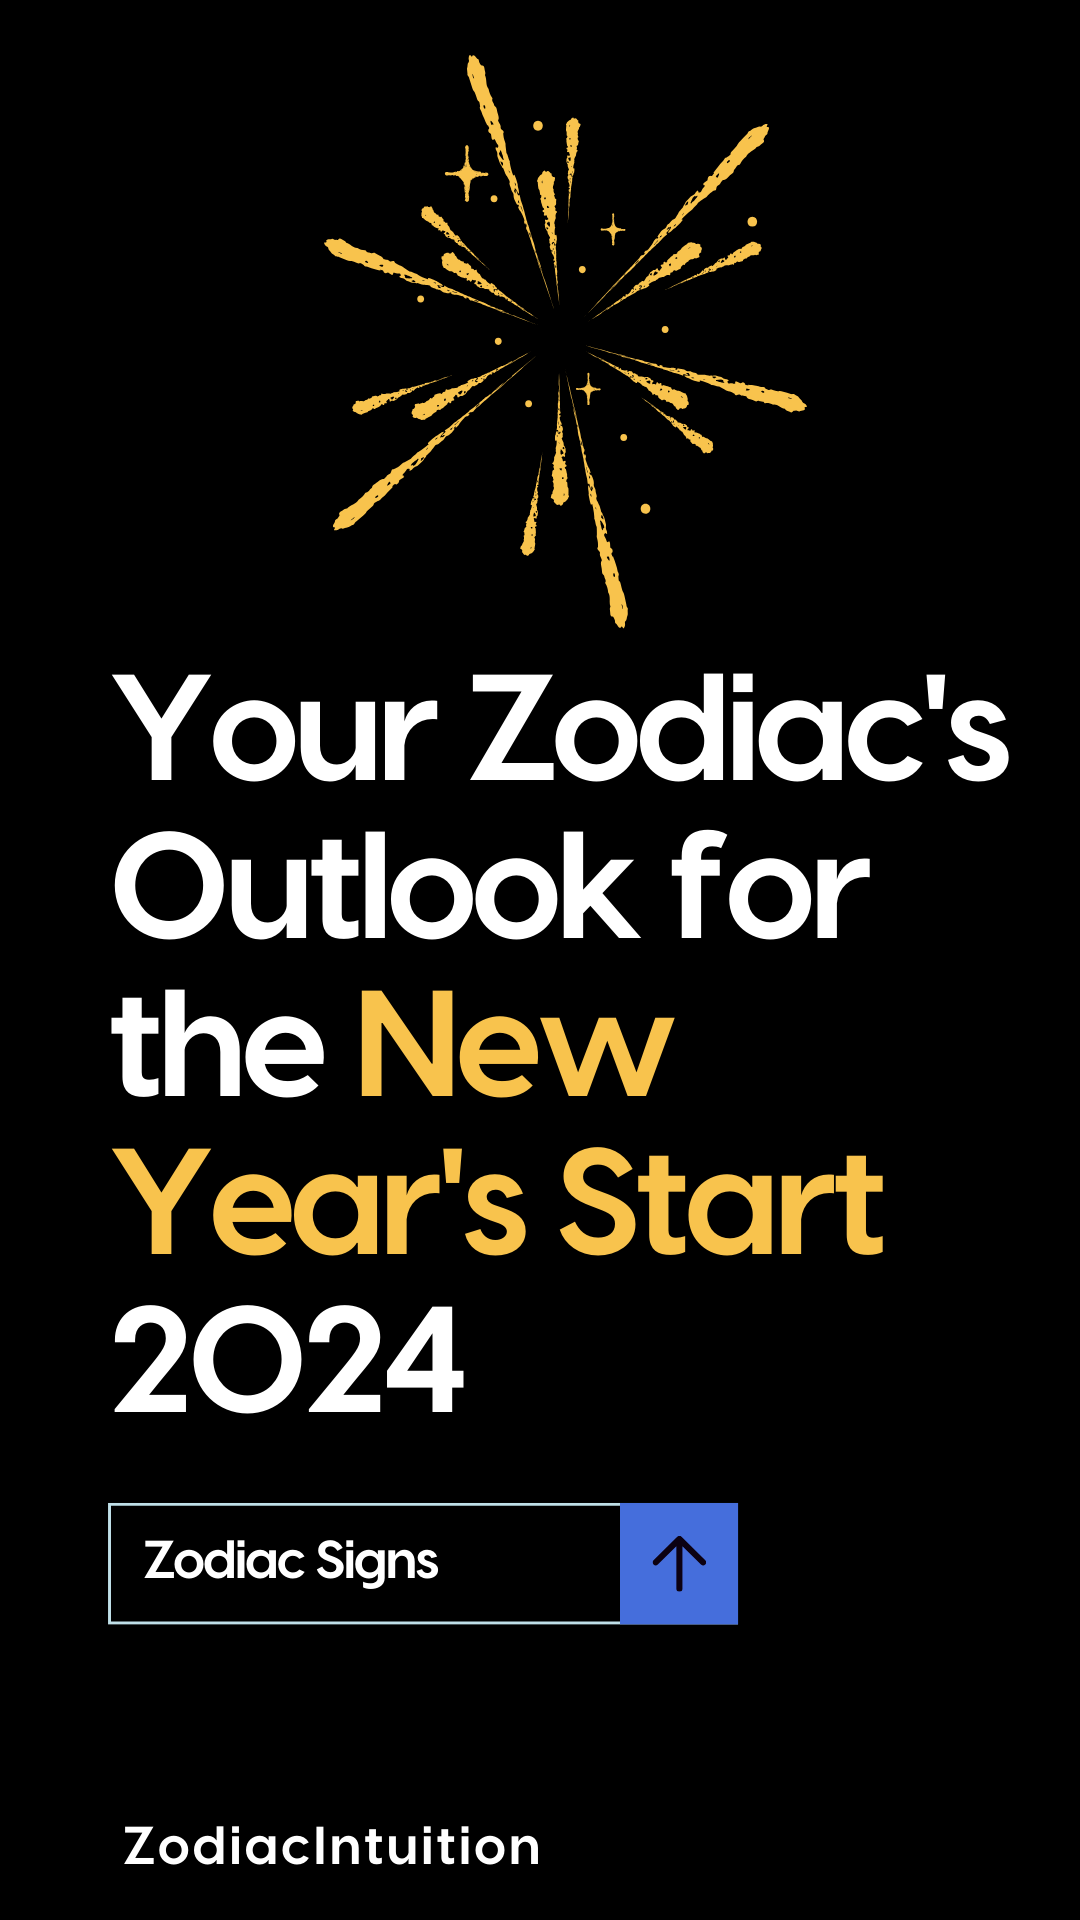 Your Zodiac's Outlook for the New Year's Start 2024